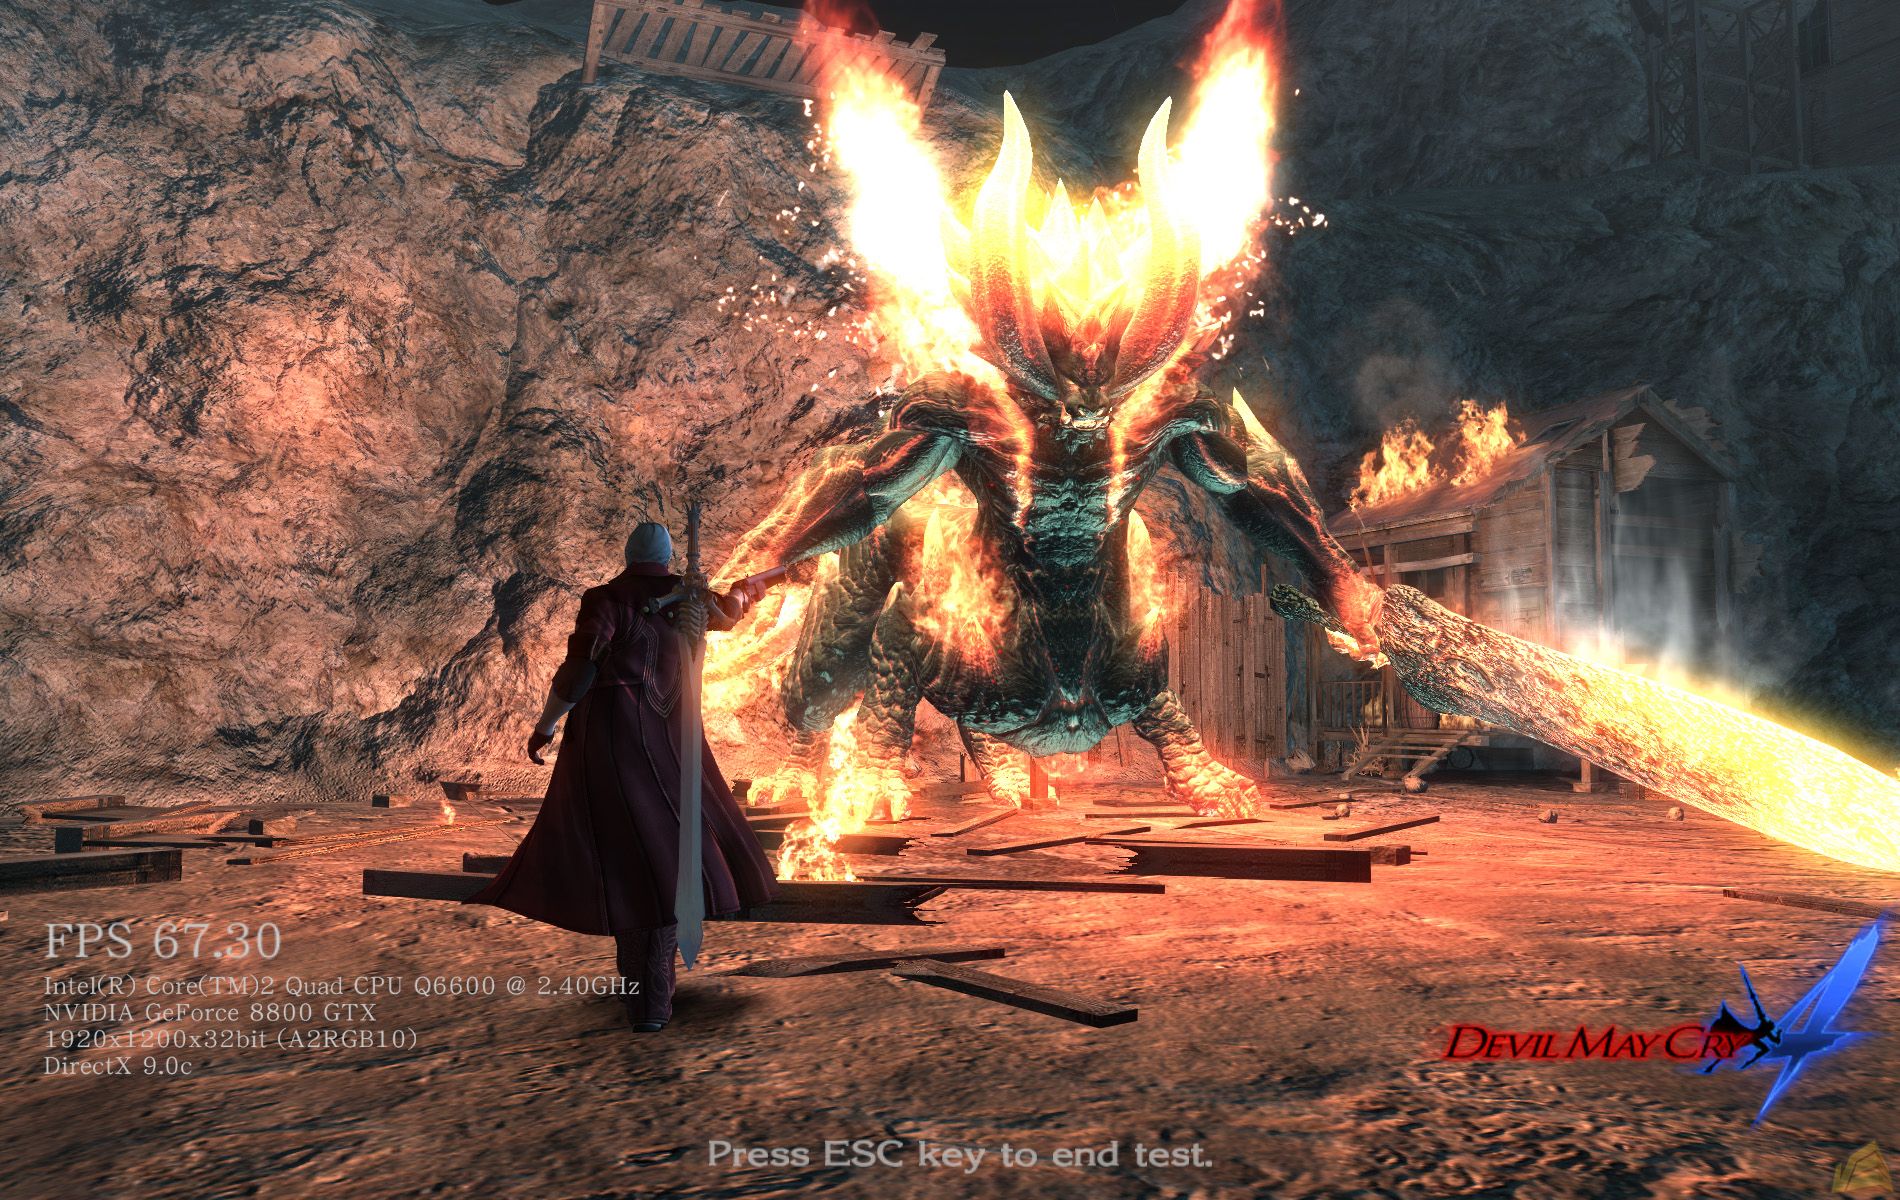 Devil may cry 4 reloaded system requirements